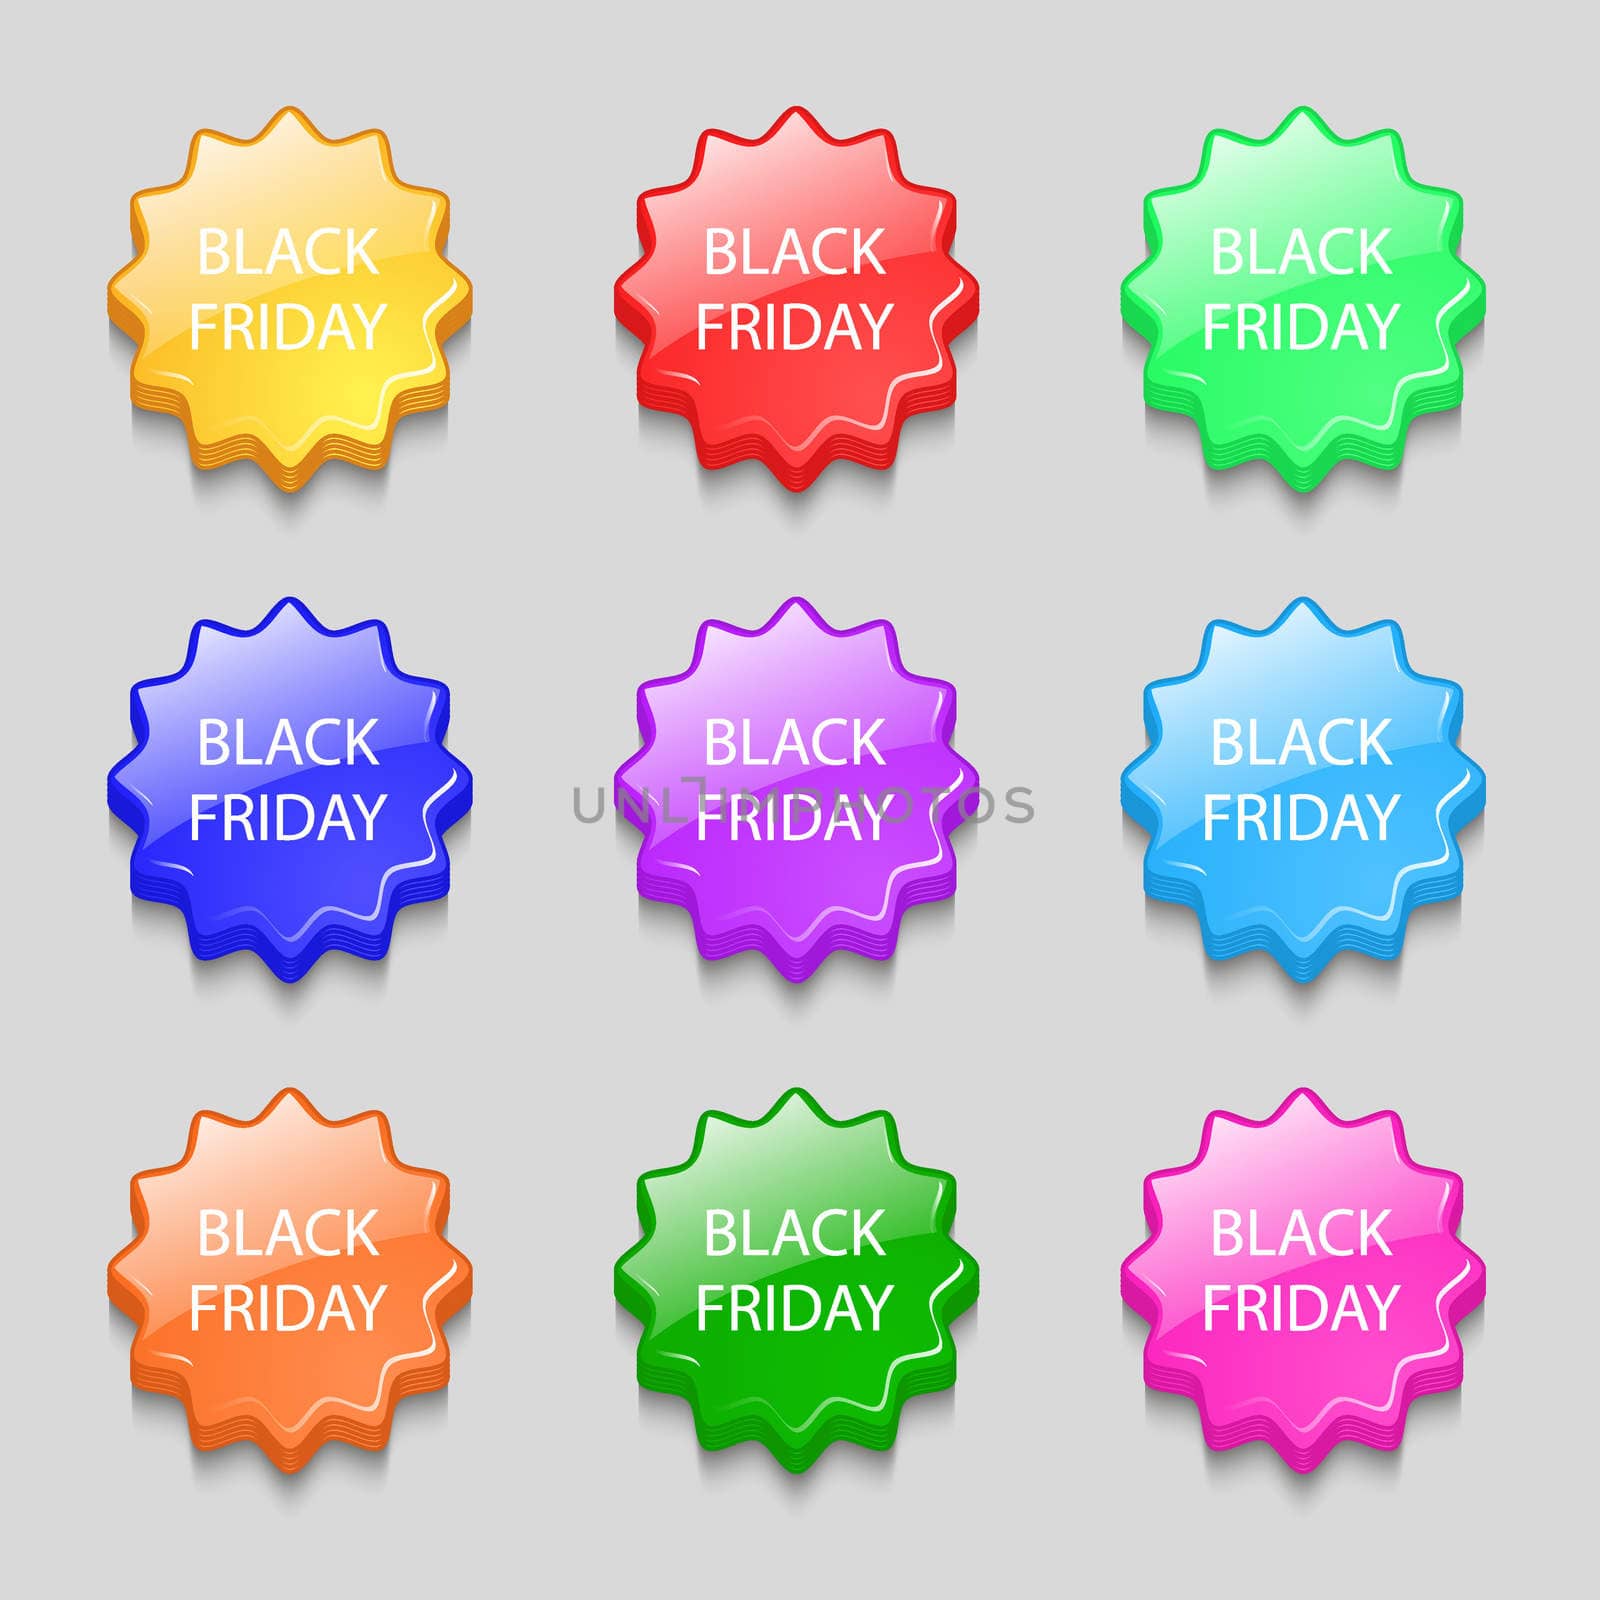 Black friday sign icon. Sale symbol.Special offer label. Symbols on nine wavy colourful buttons. illustration